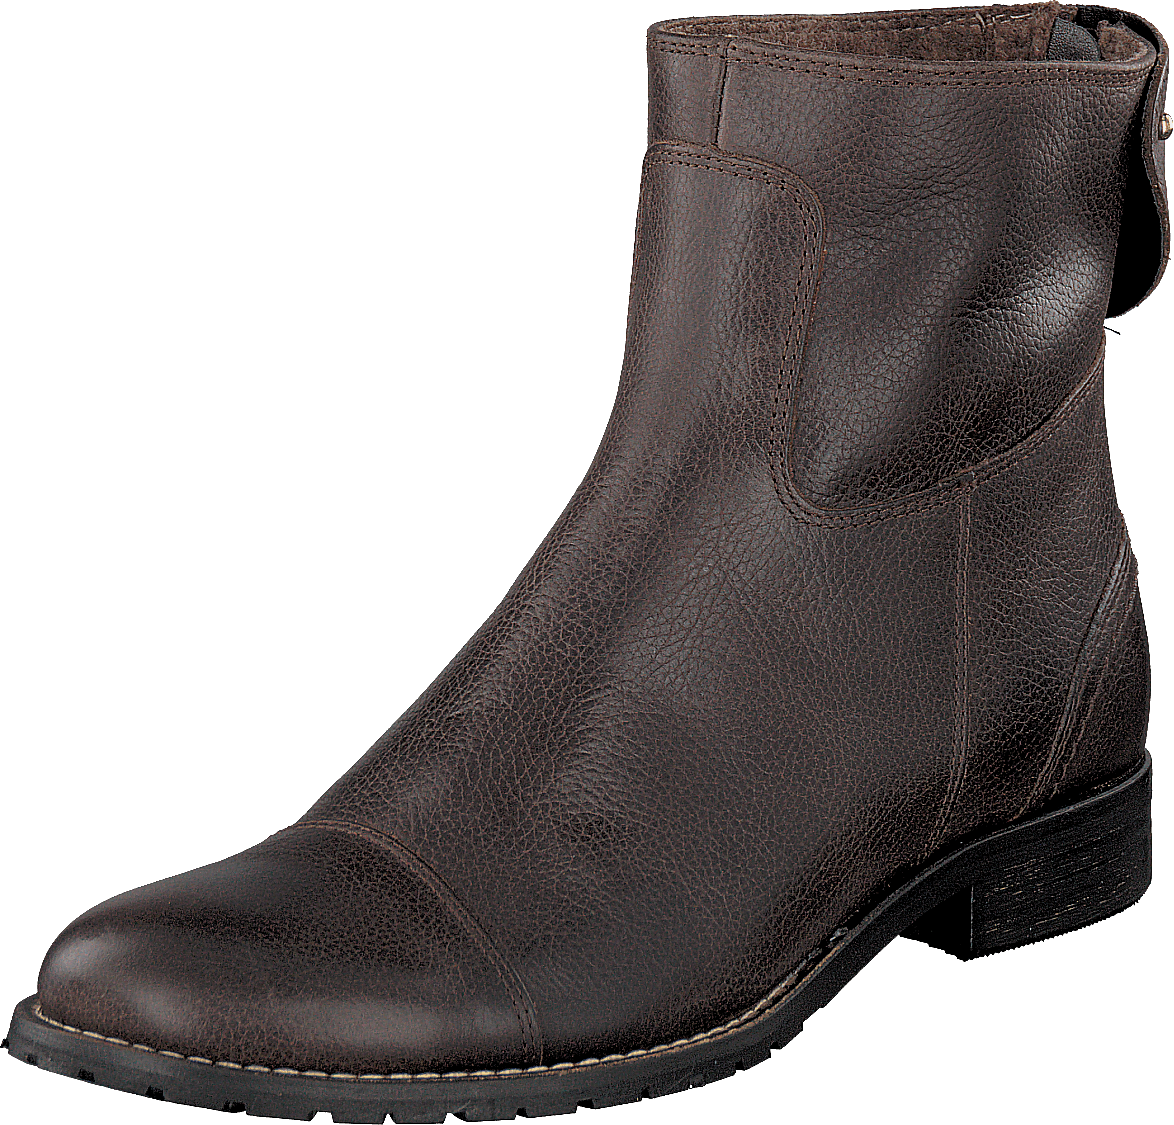 Ancle Boot Prune